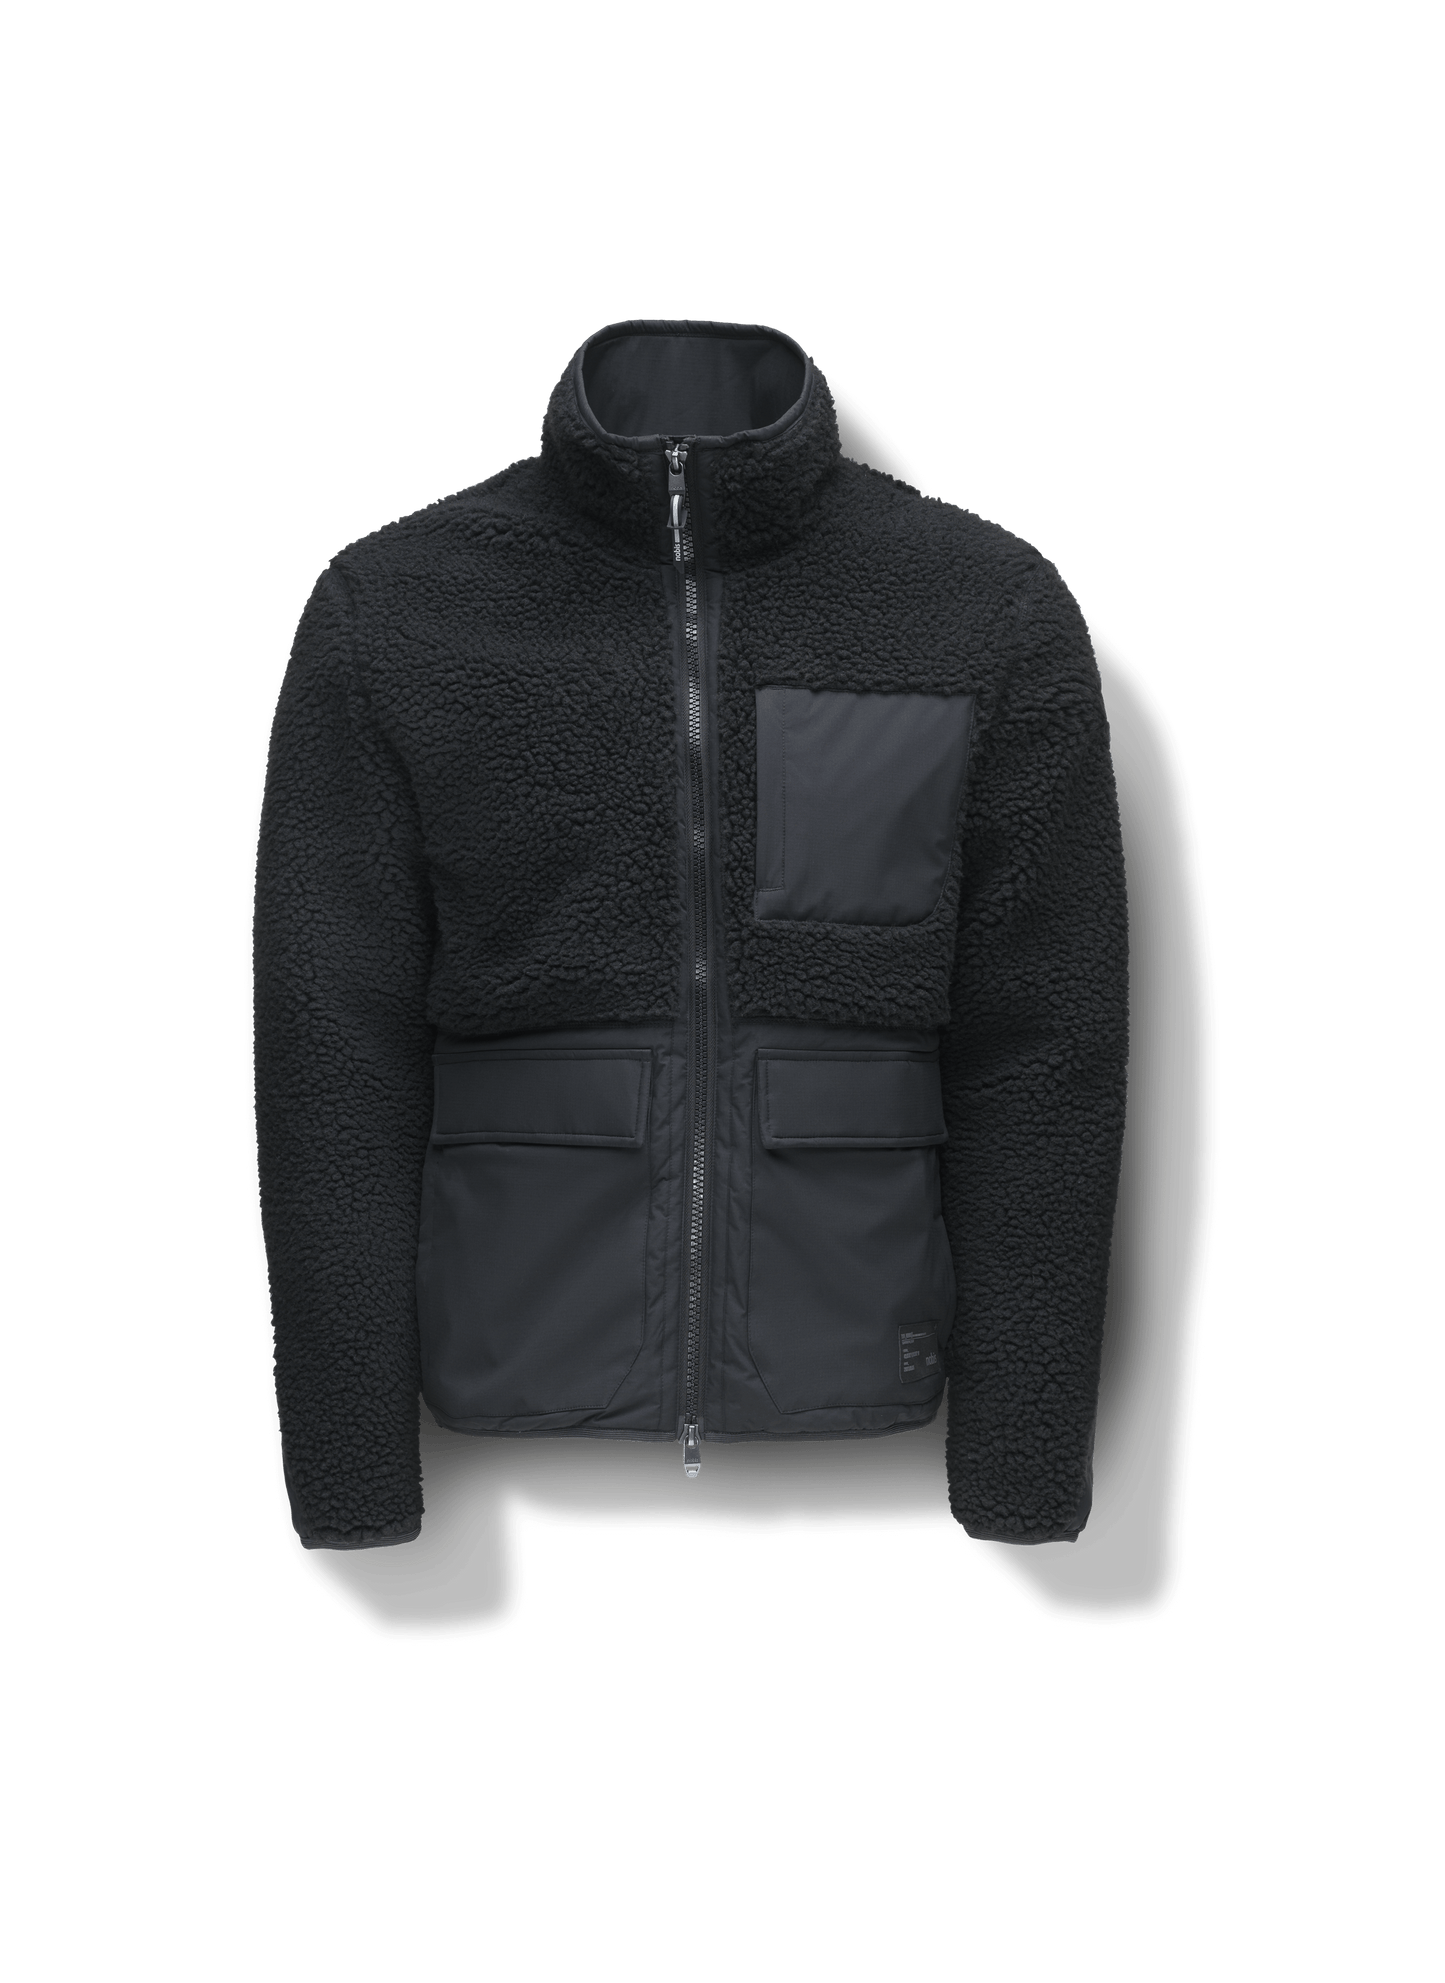 Kepler Men's Berber Zip Front Sweater in hip length, premium berber and stretch ripstop fabrication, Primaloft Gold Insulation Active+, two-way centre-front zipper, zipper pocket at left chest, magnetic closure flap pockets at waist with additional side-entry pockets, in Black